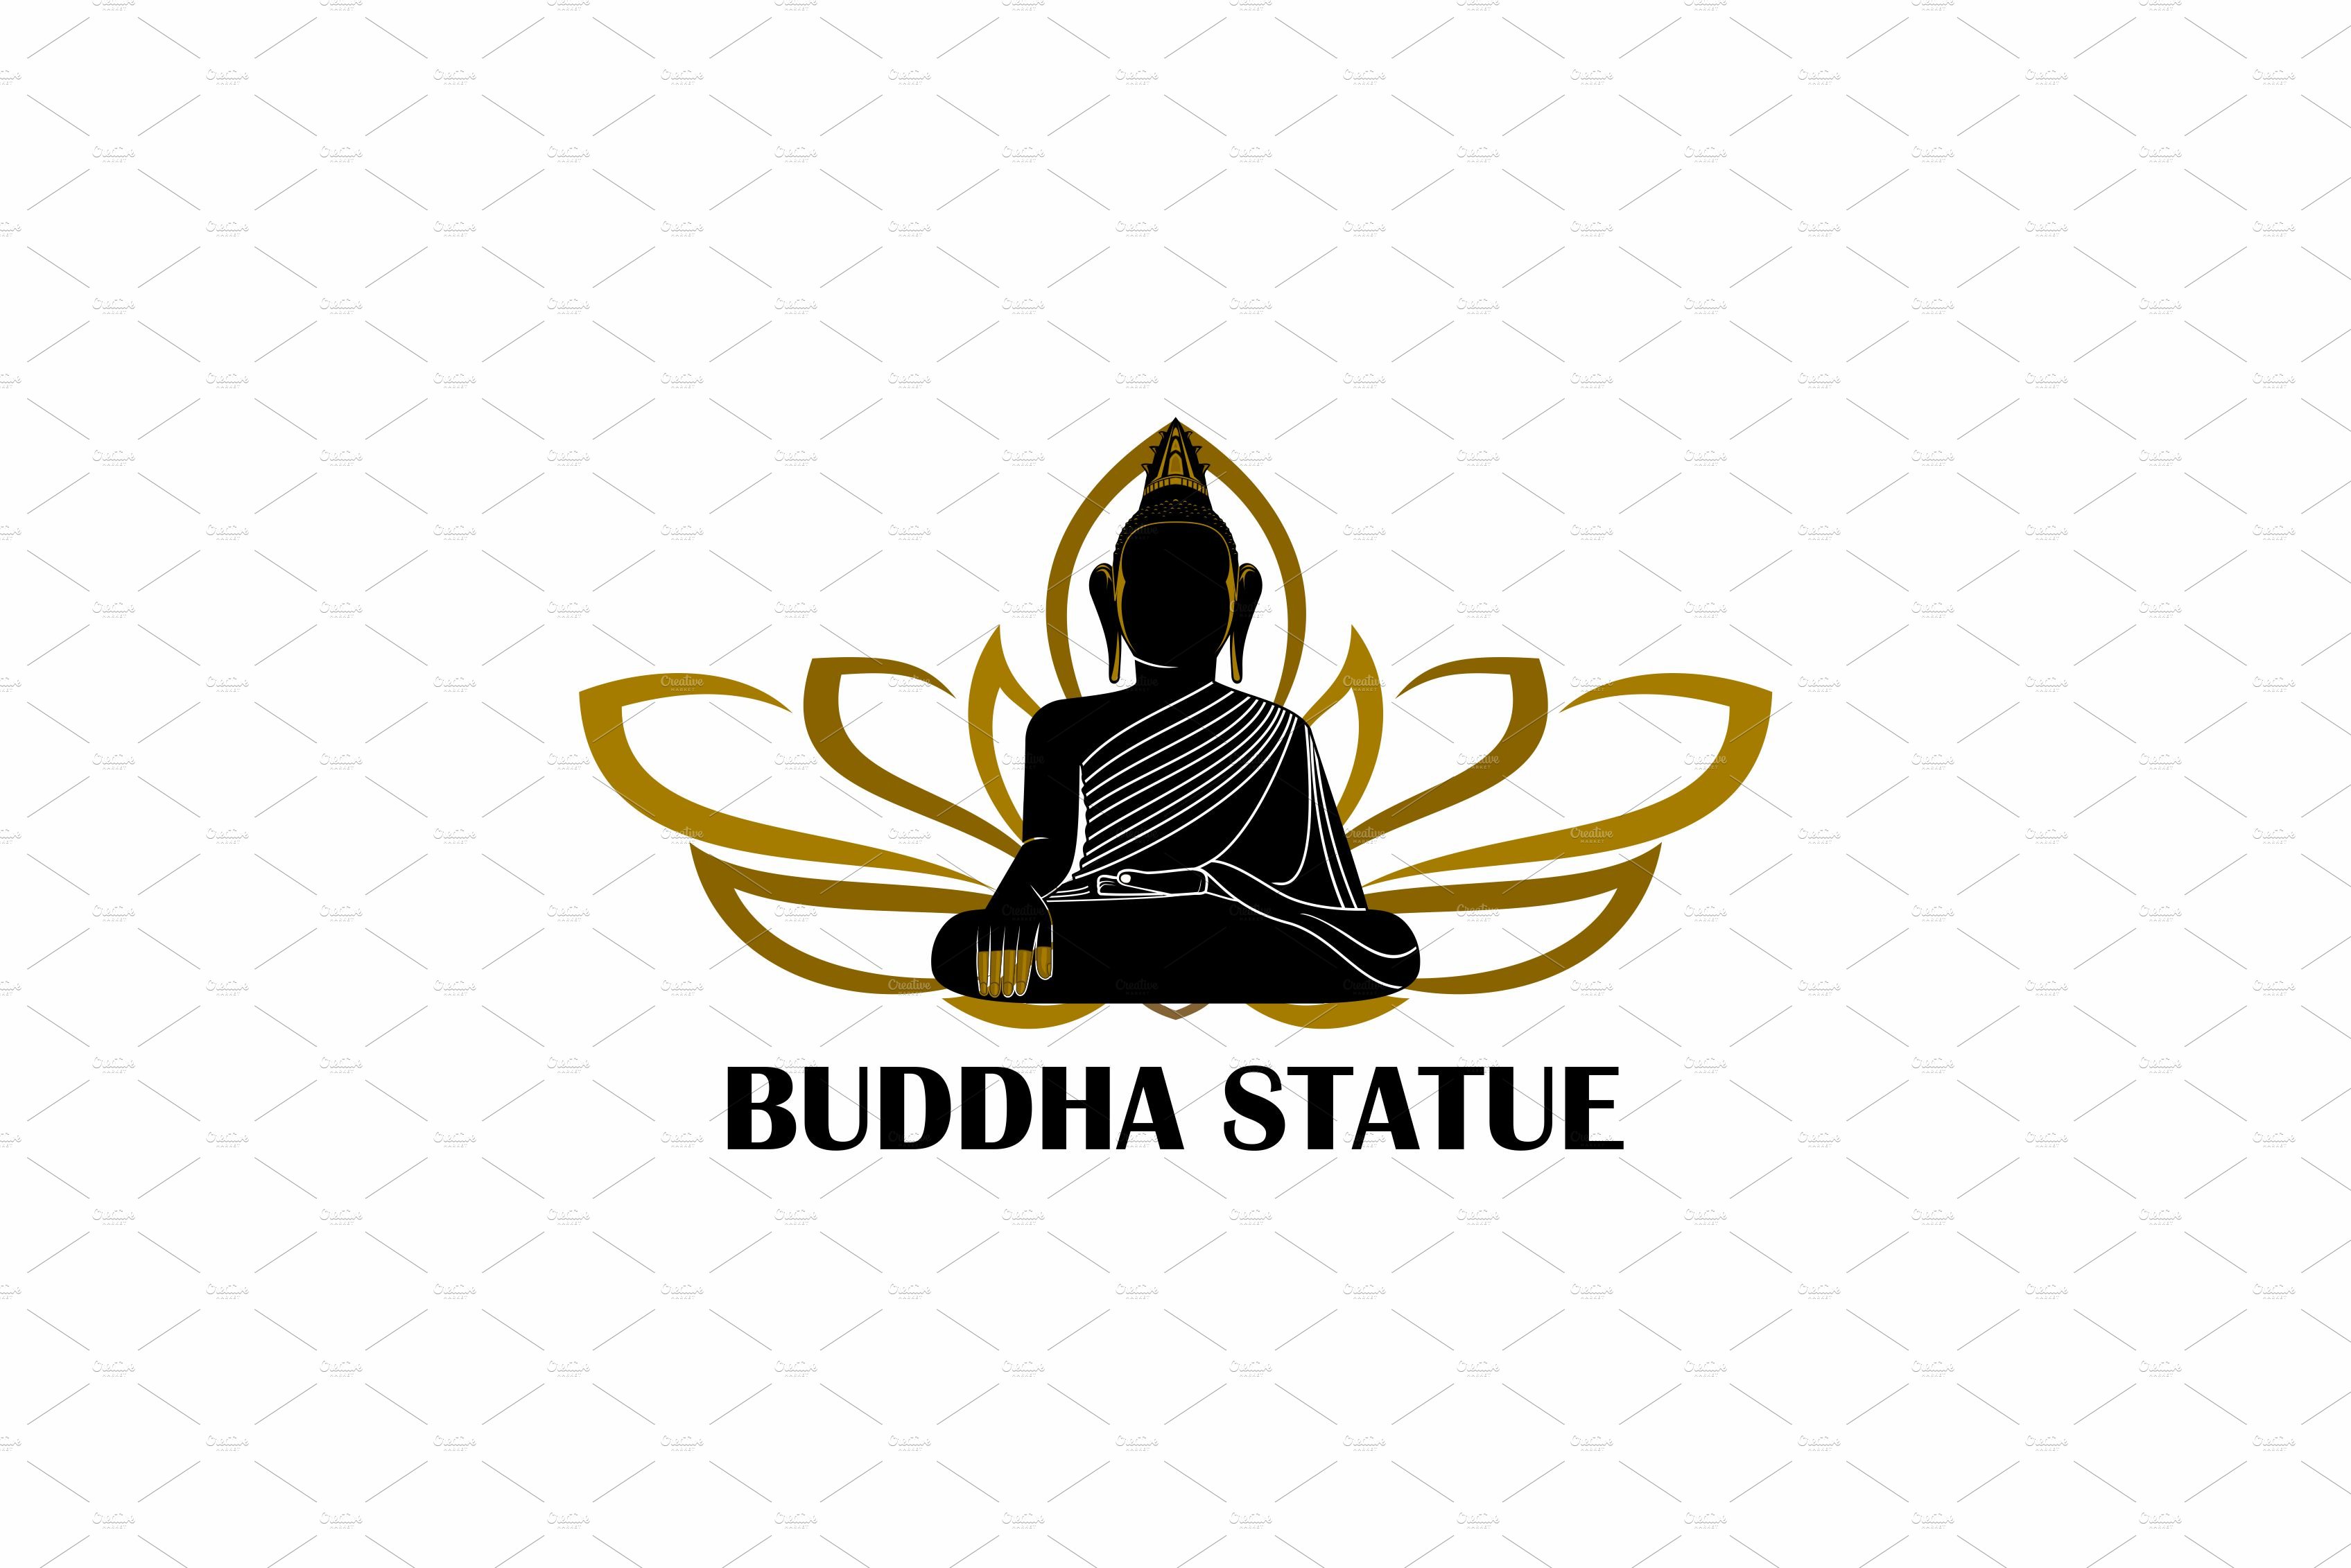 Buddha logo design silhouette sketch Vectors graphic art designs in  editable .ai .eps .svg .cdr format free and easy download unlimit id:6920590